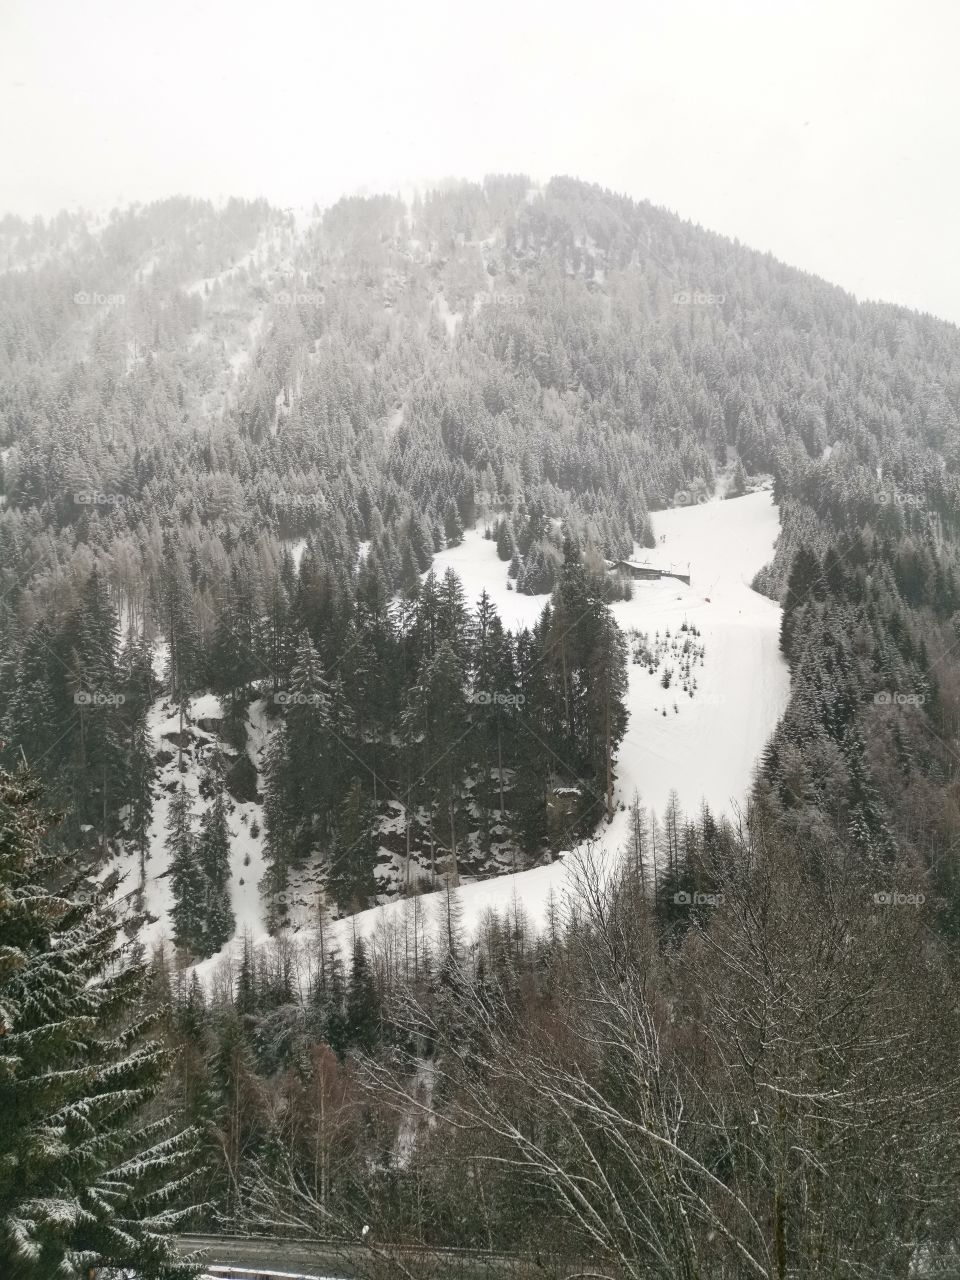 Snowy view up the mountain